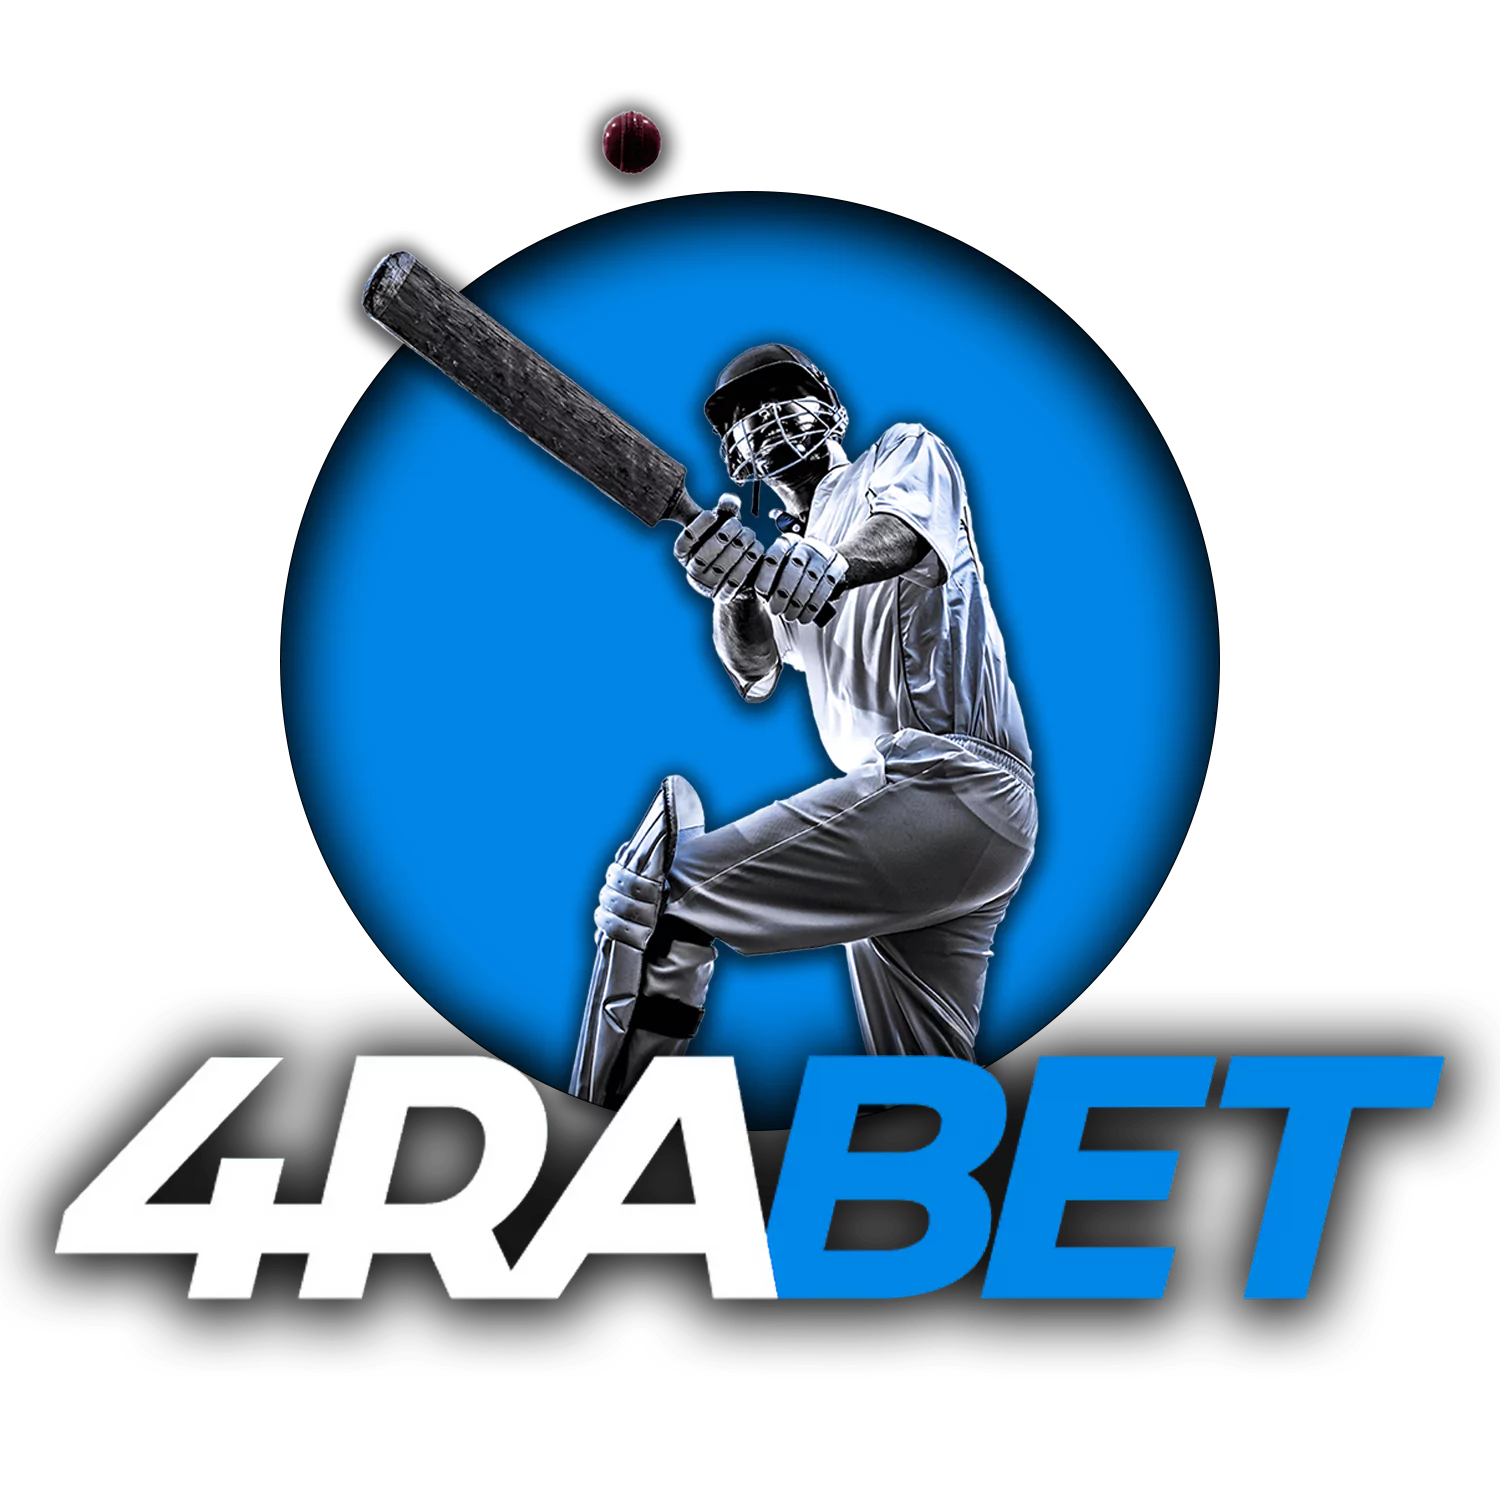 4rabet is the official site for betting on sporting events in India. Register and get 200% bonus on your first deposit.